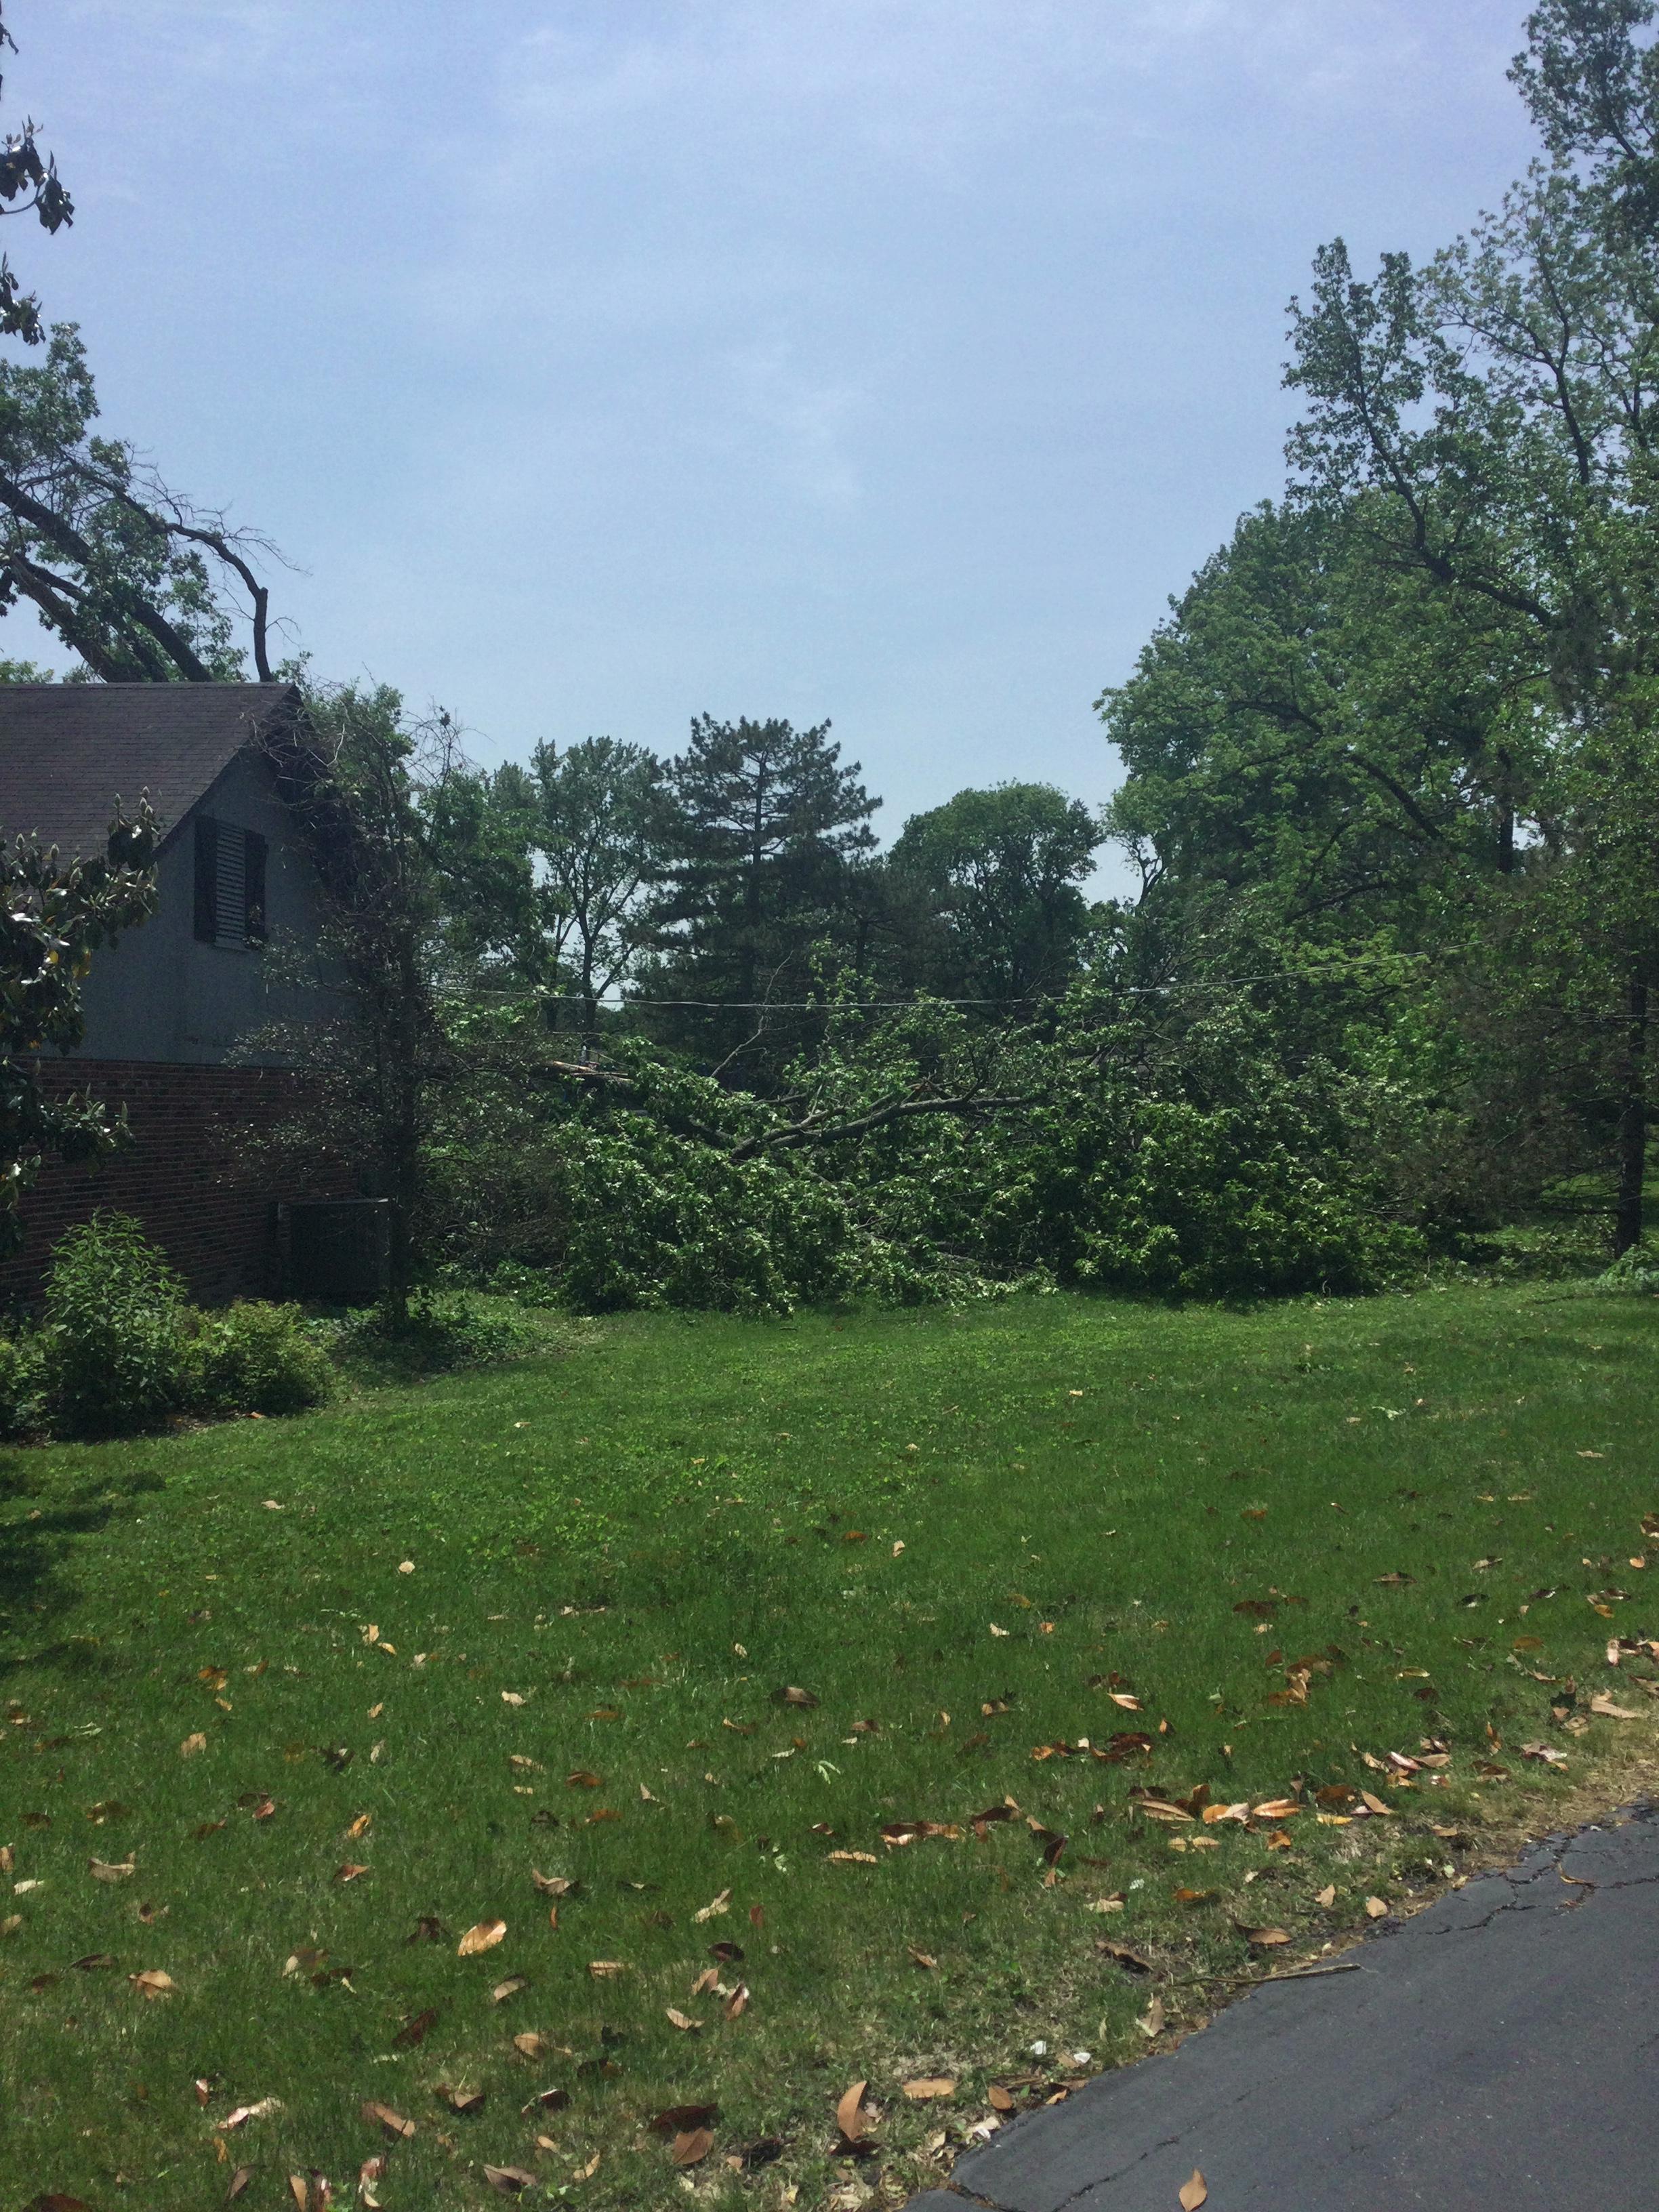 Large tree branches sheared off near a house by a tornado in Frontenac.